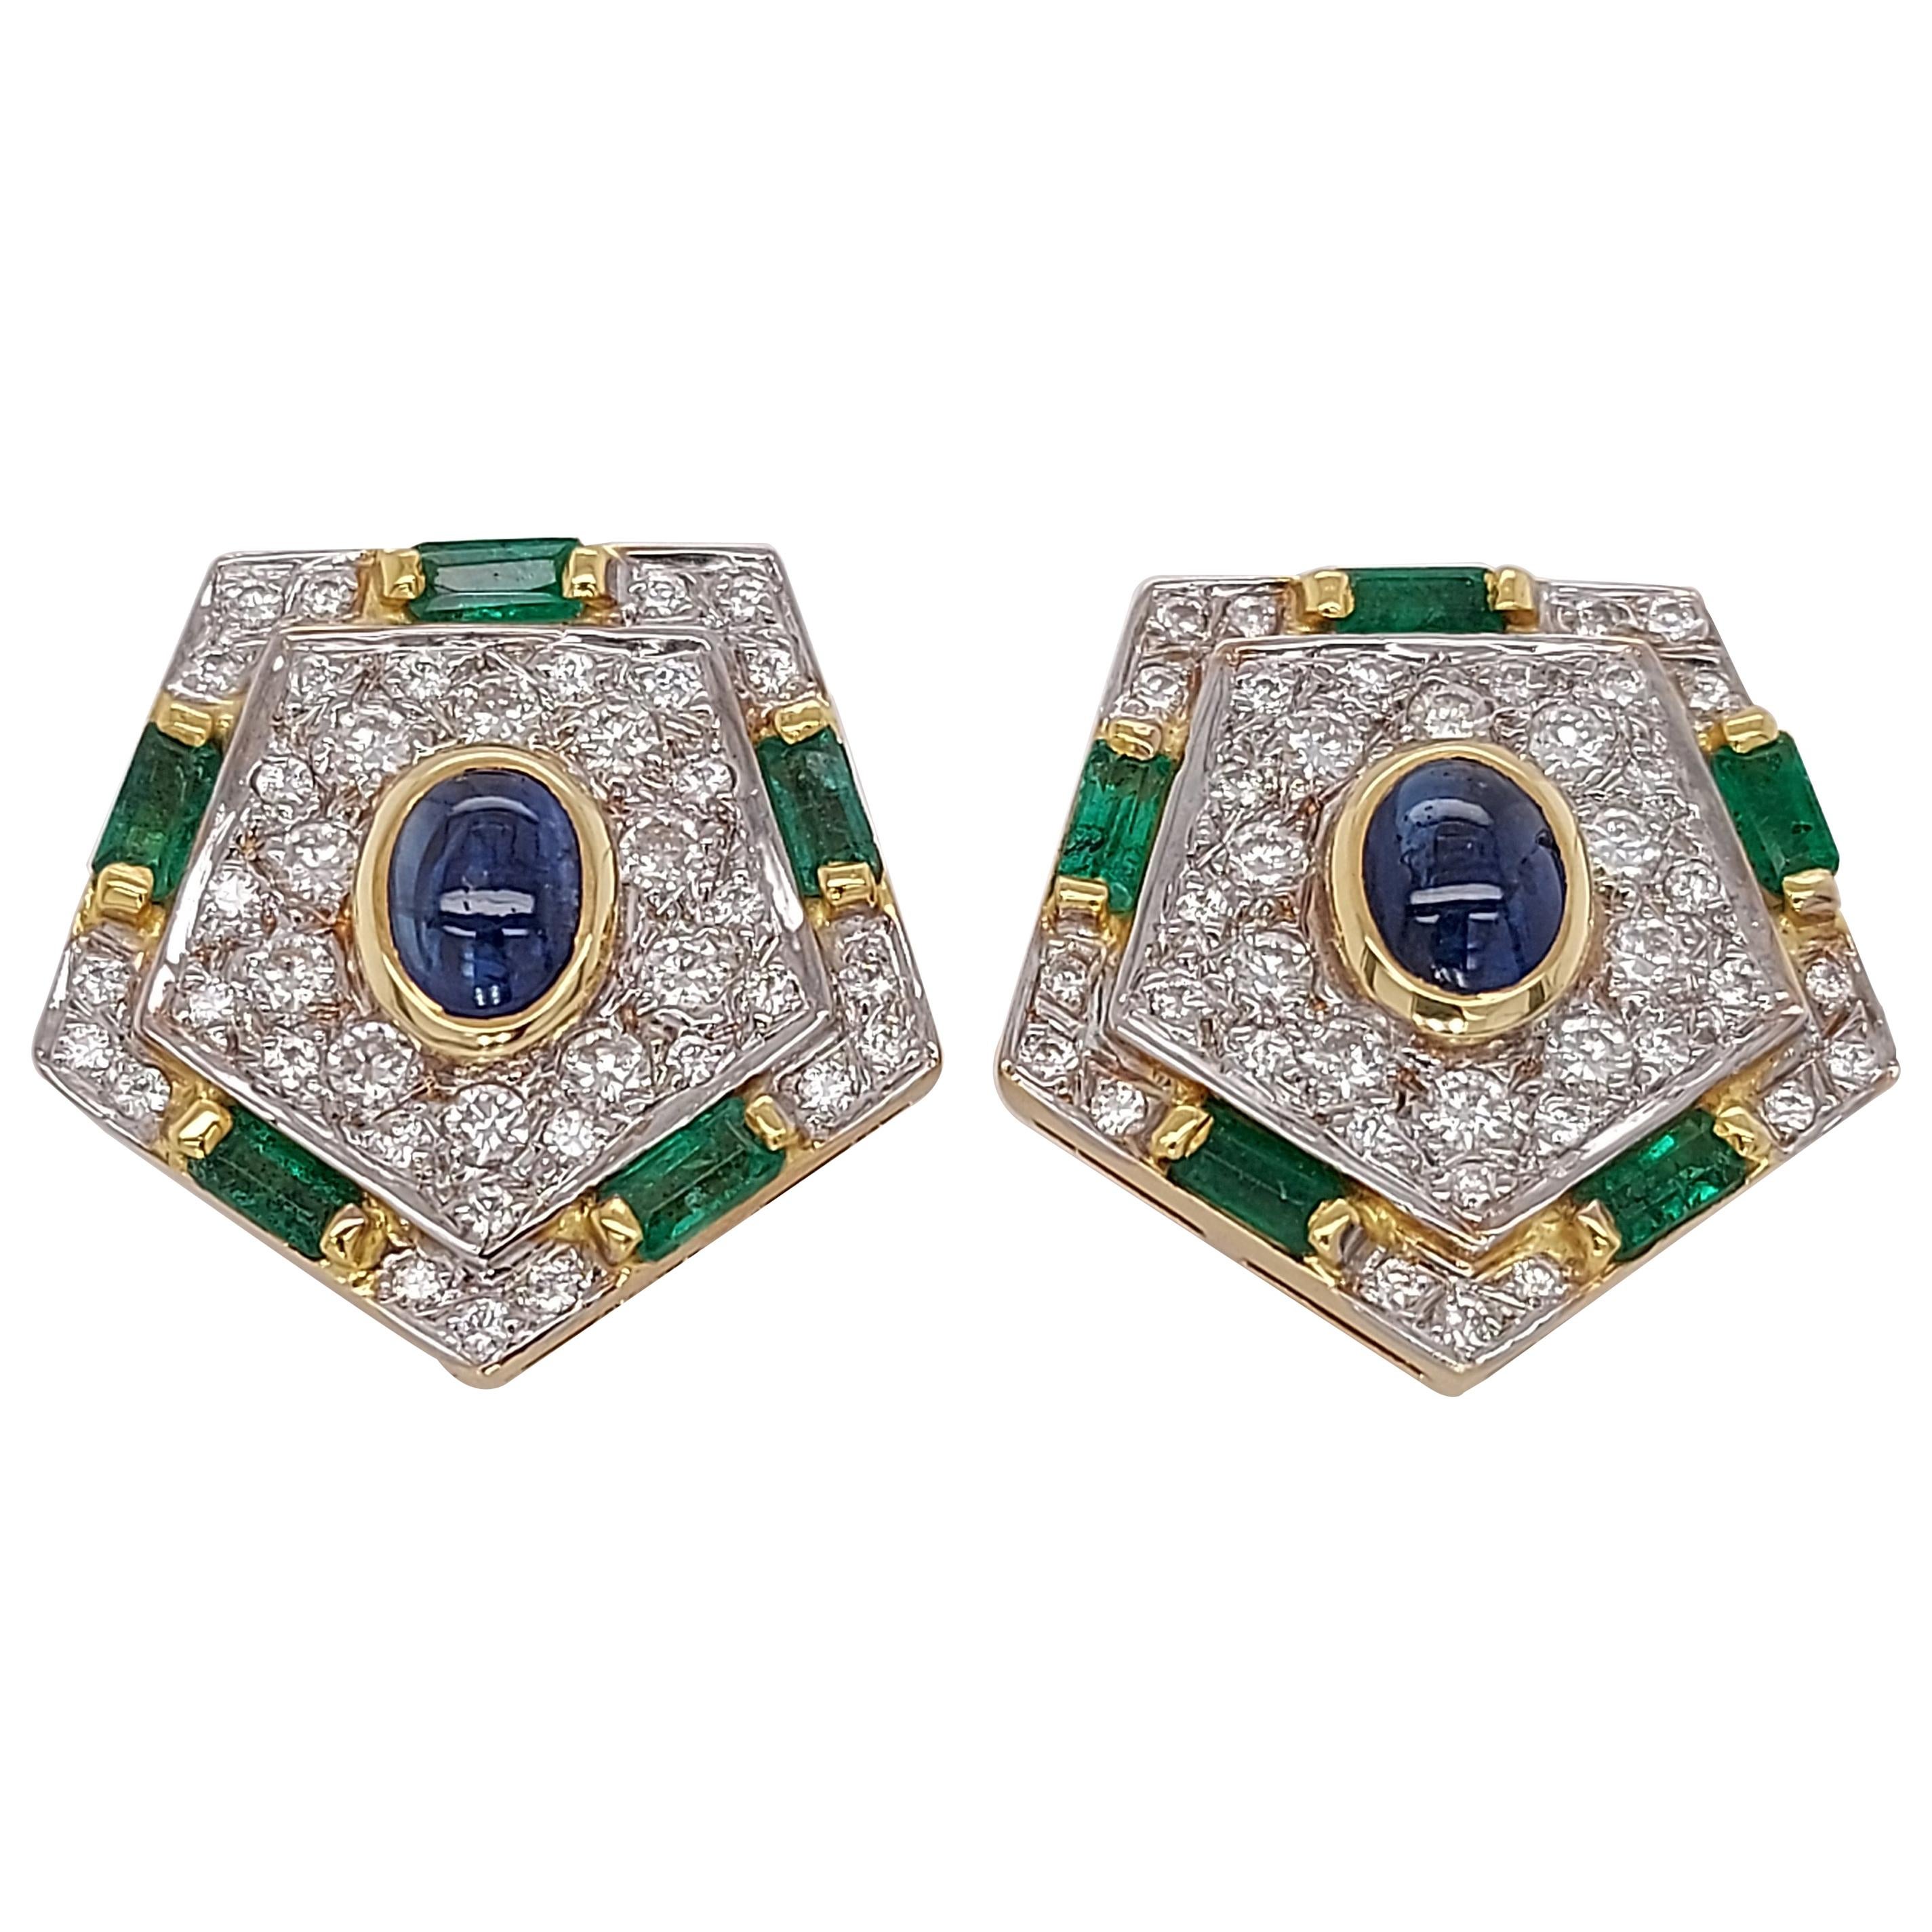 Luxurious Gold Clip-On Earrings With Diamonds, Emerald and Cabochon Sapphire